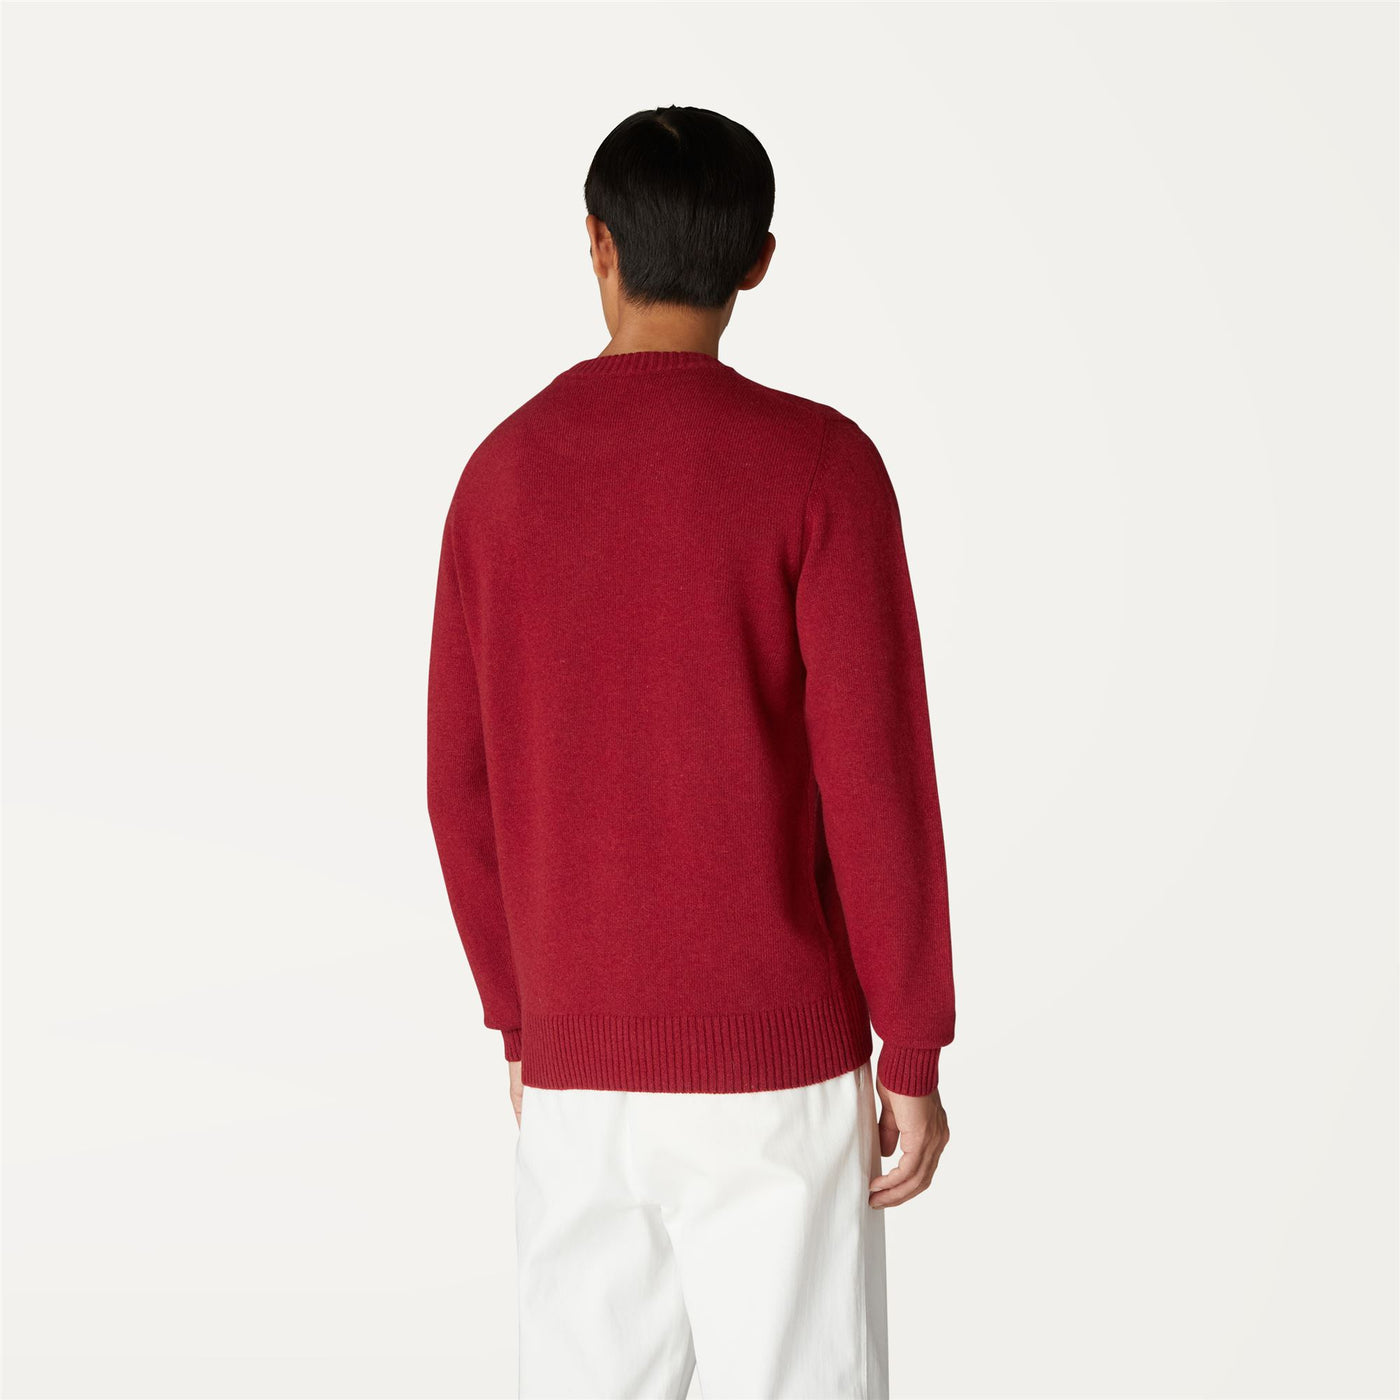 Knitwear Man SEBASTIEN LAMBSWOOL Pull  Over RED DK Dressed Front Double		